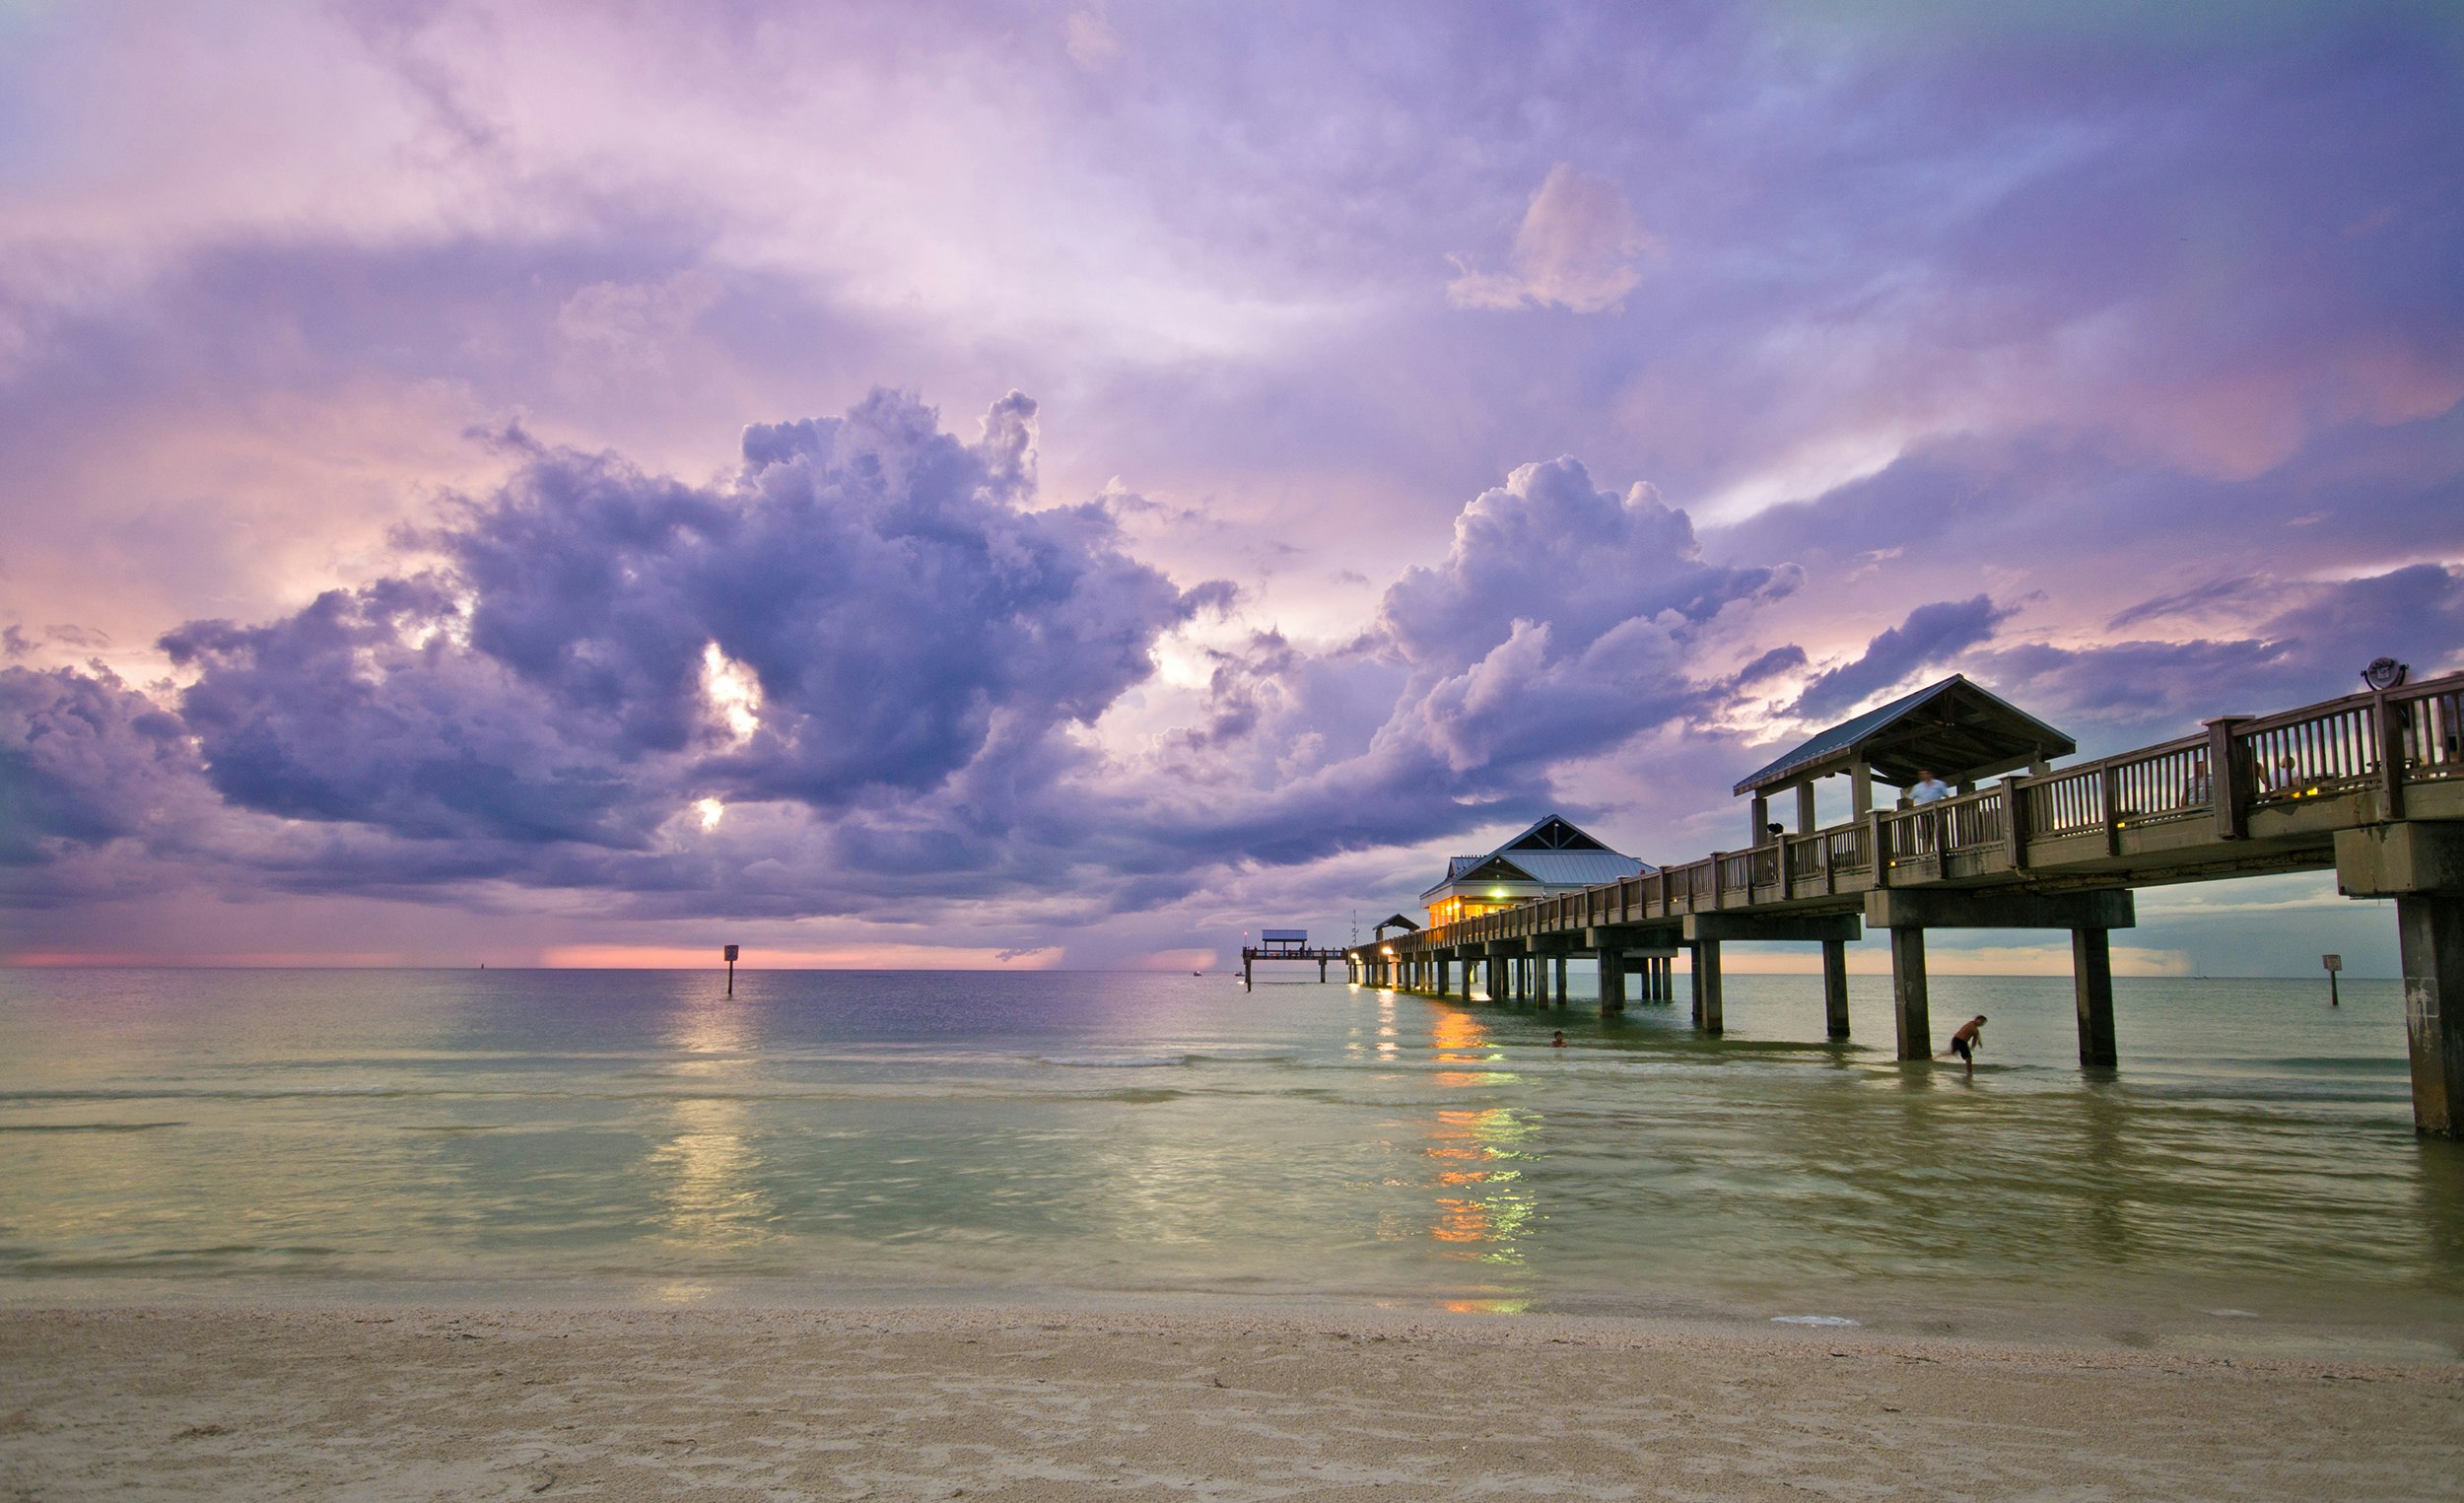 Purple clouds at sunset on a clearwater, white sand beach with the pier in view